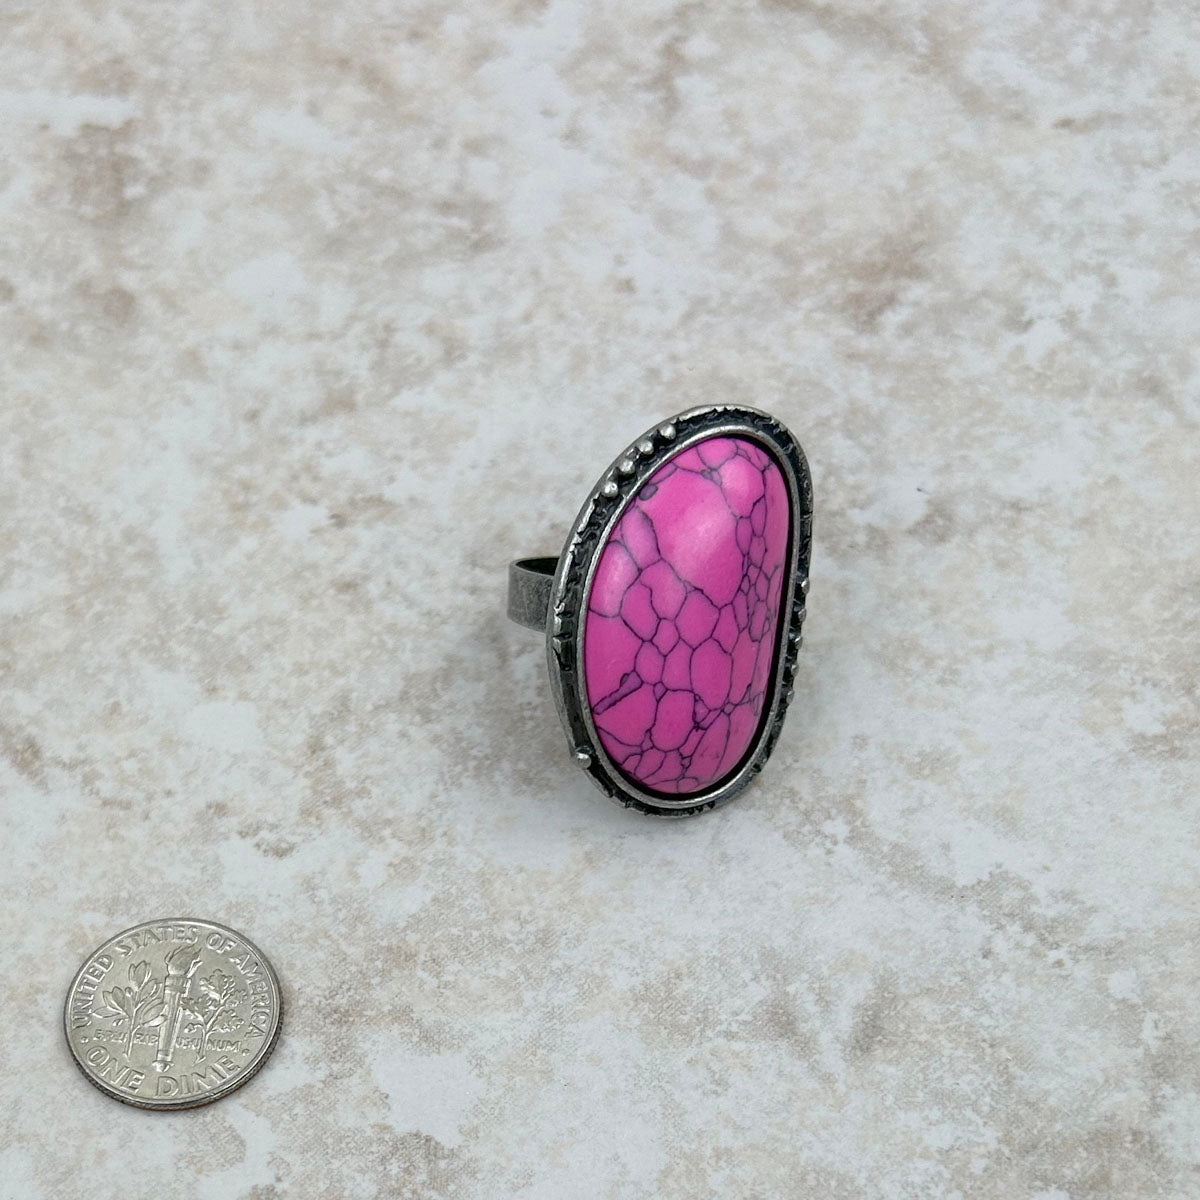 RGS230701-01-PINK	Silver with hot pink stone oval adjustable Ring